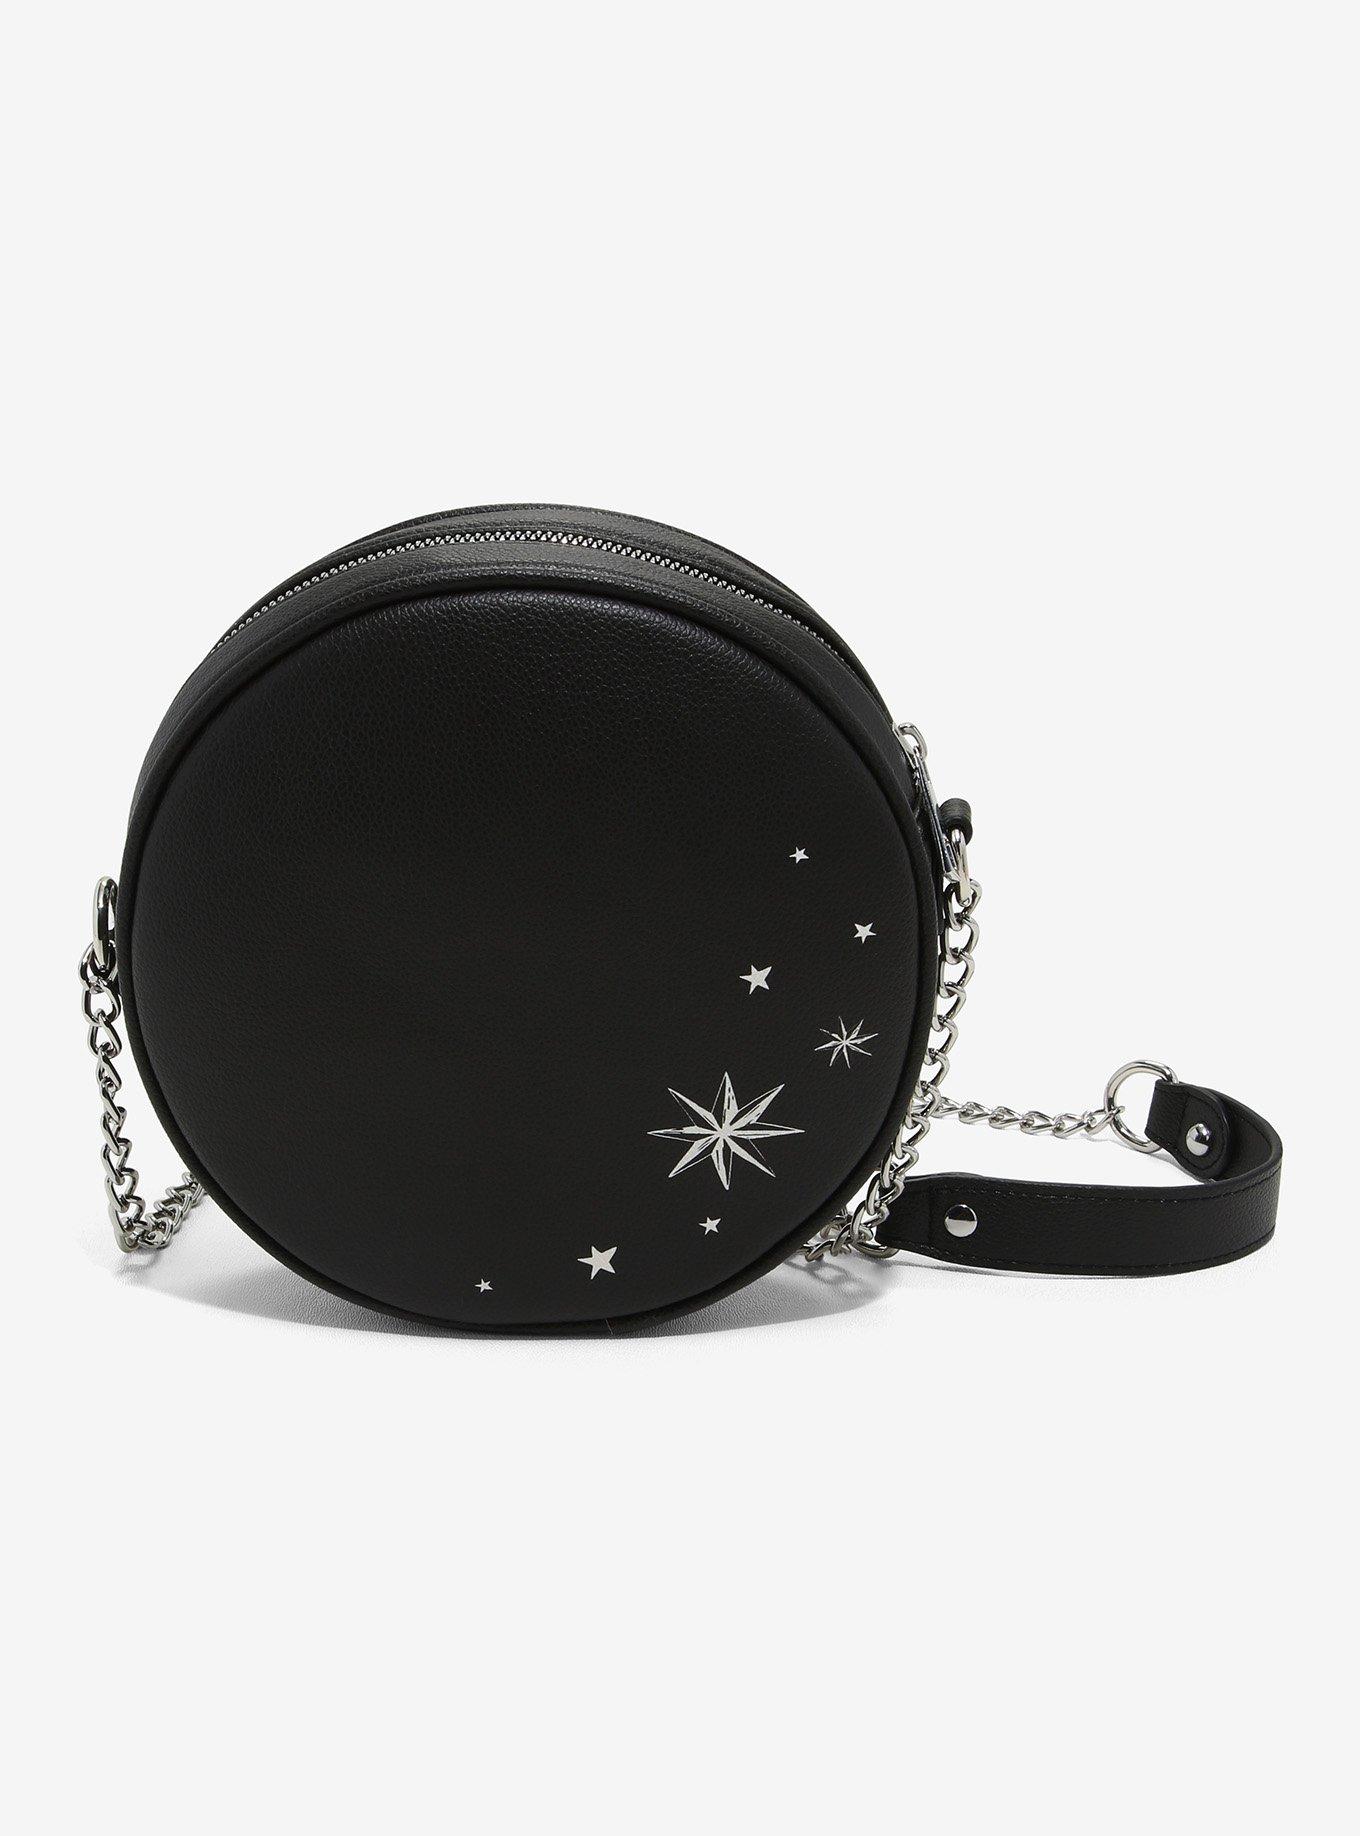 Glow in the Dark Bags (Parker House)  Glow in the Dark - These crossbody  bags has all the makings of an edgy arm candy. The Grey finished with an  iridescent sheen